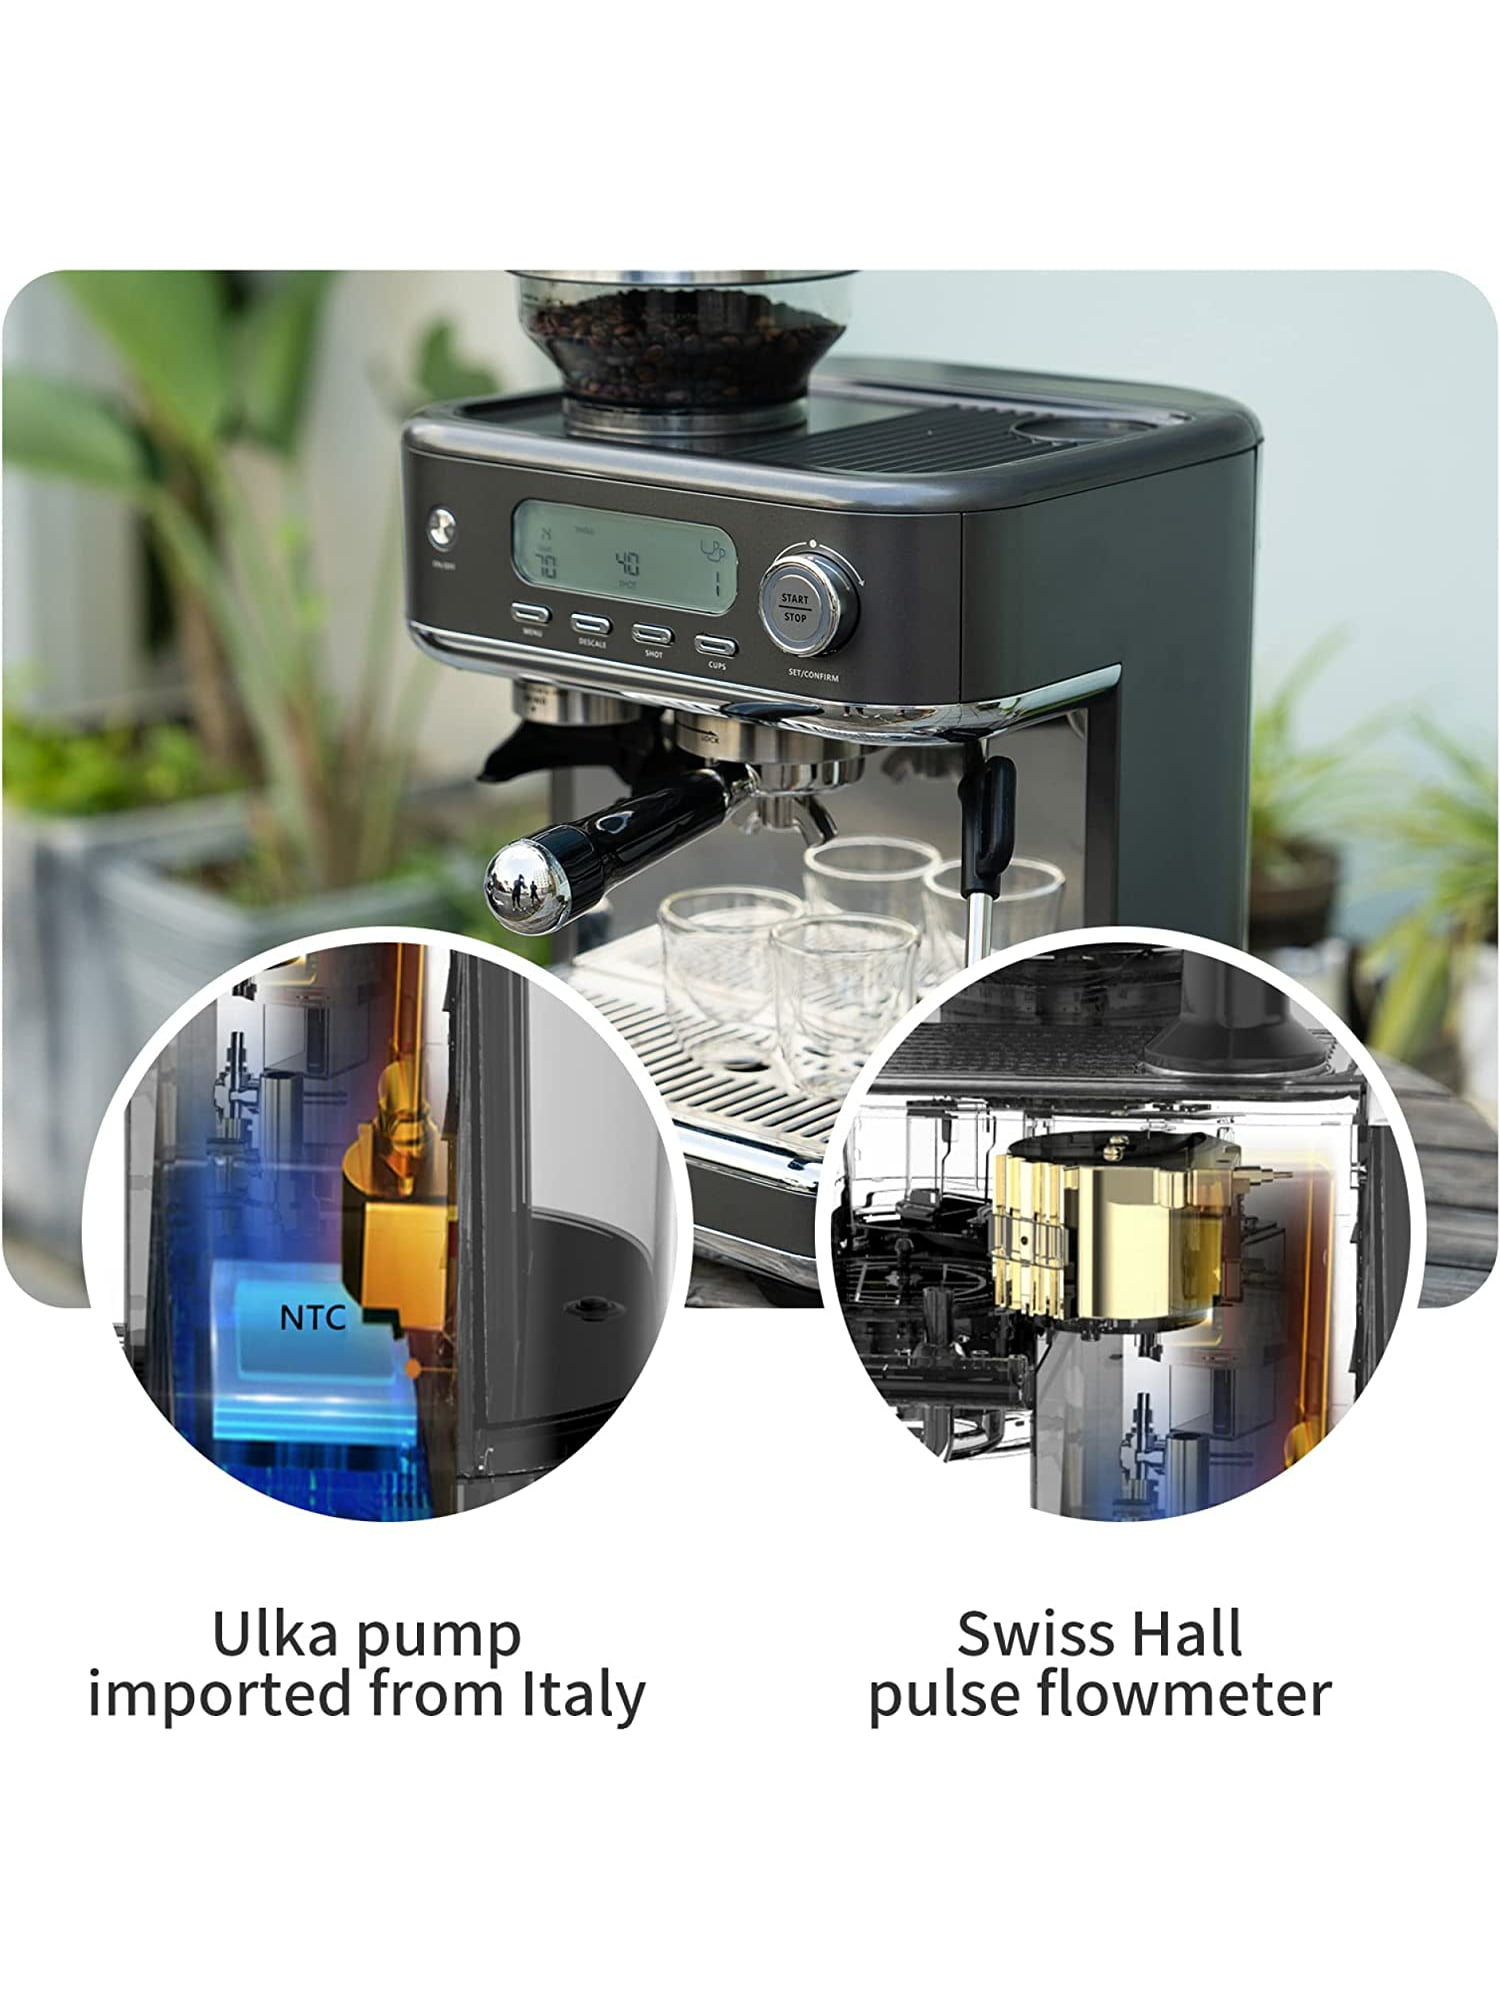 The Best Coffee Machine for Offices Aqua Cafe (gray version)